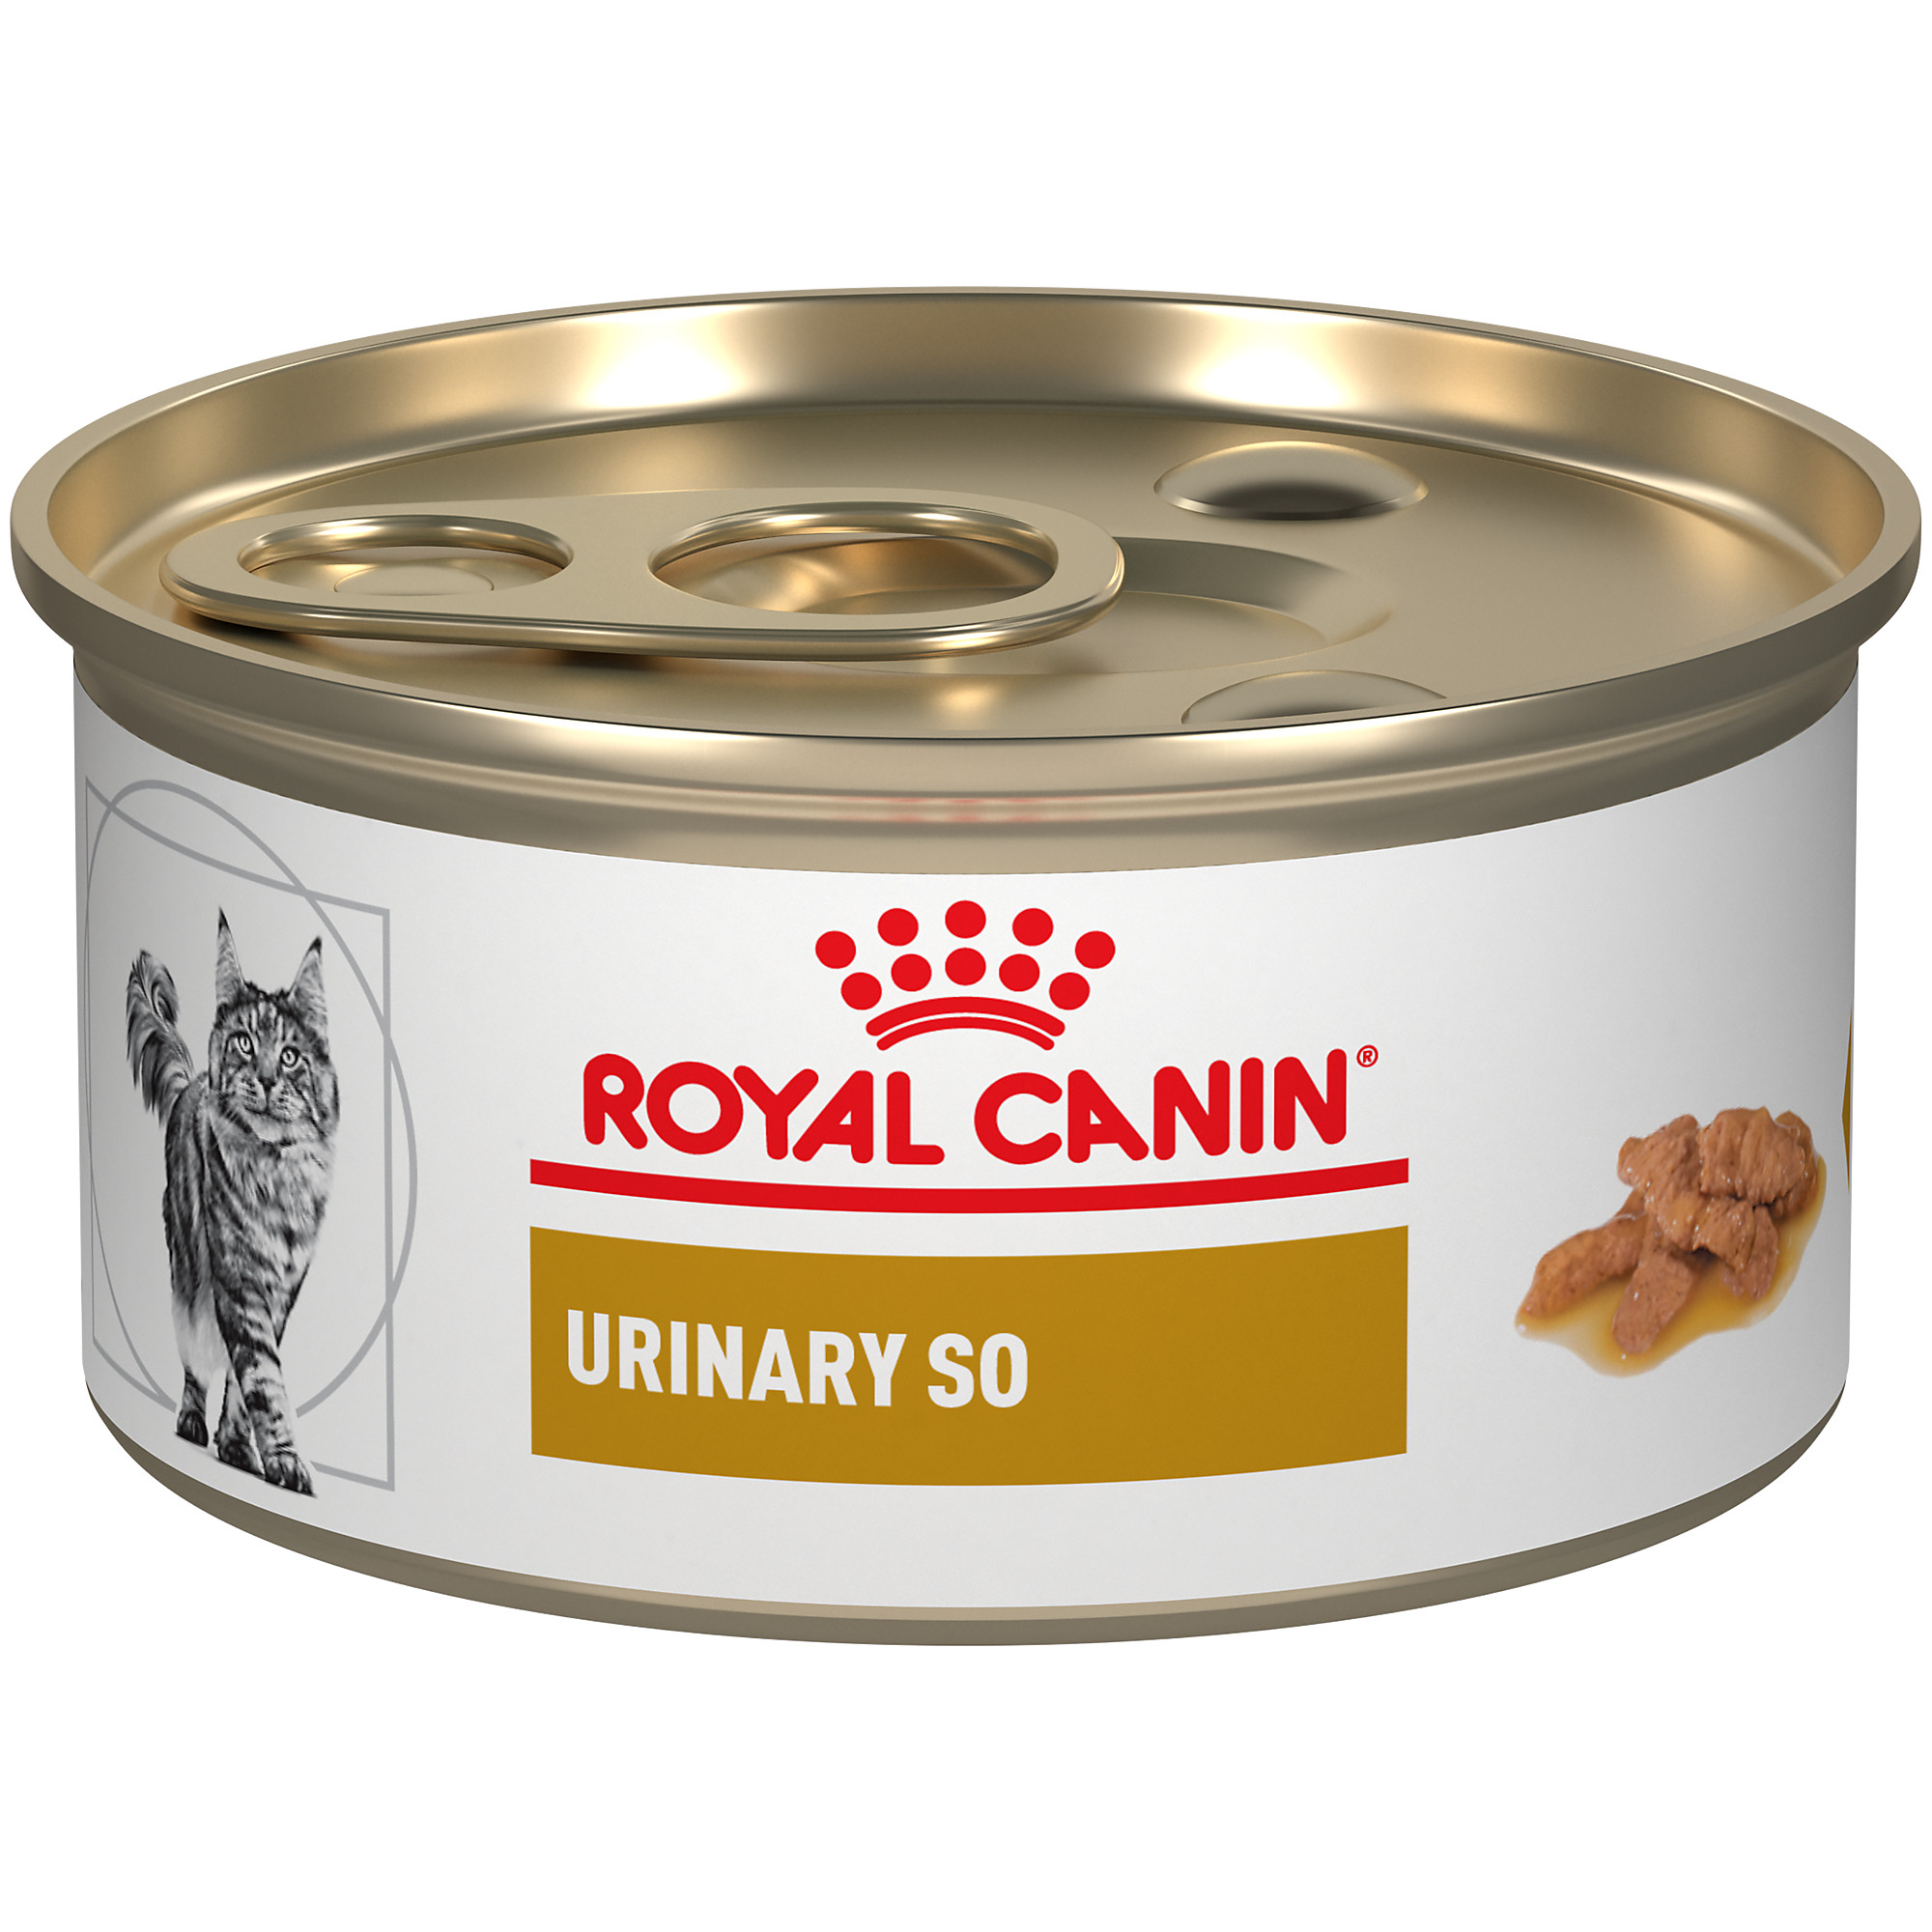 Urinary SO Morsels in Gravy Canned Cat Food Royal Canin